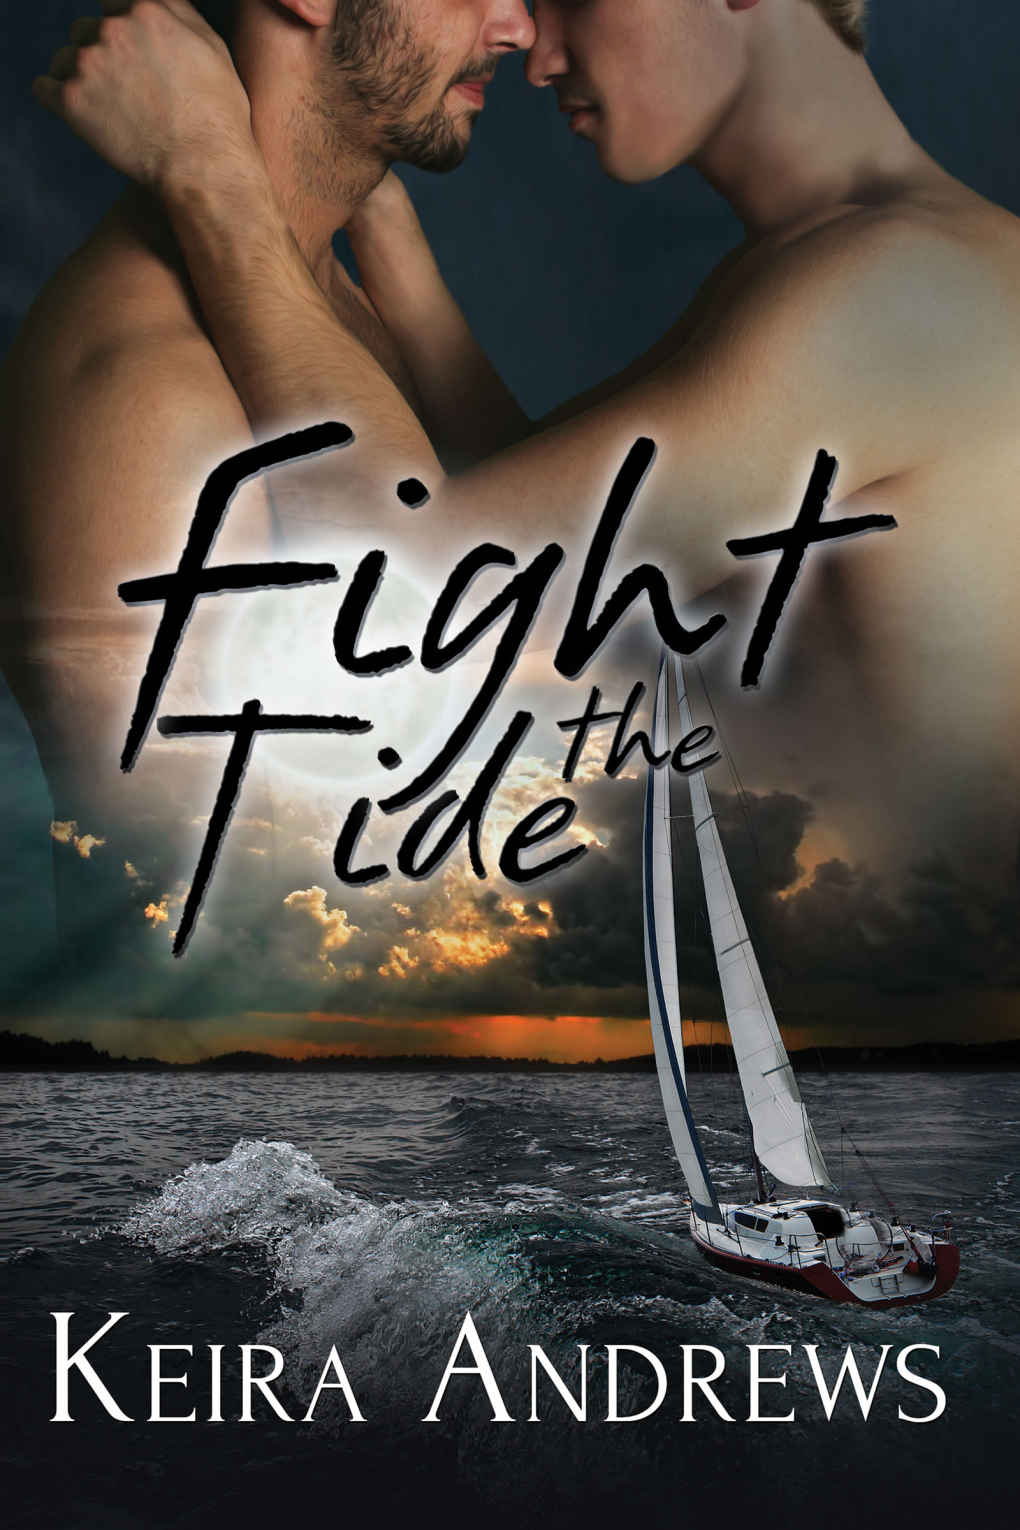 Fight the Tide